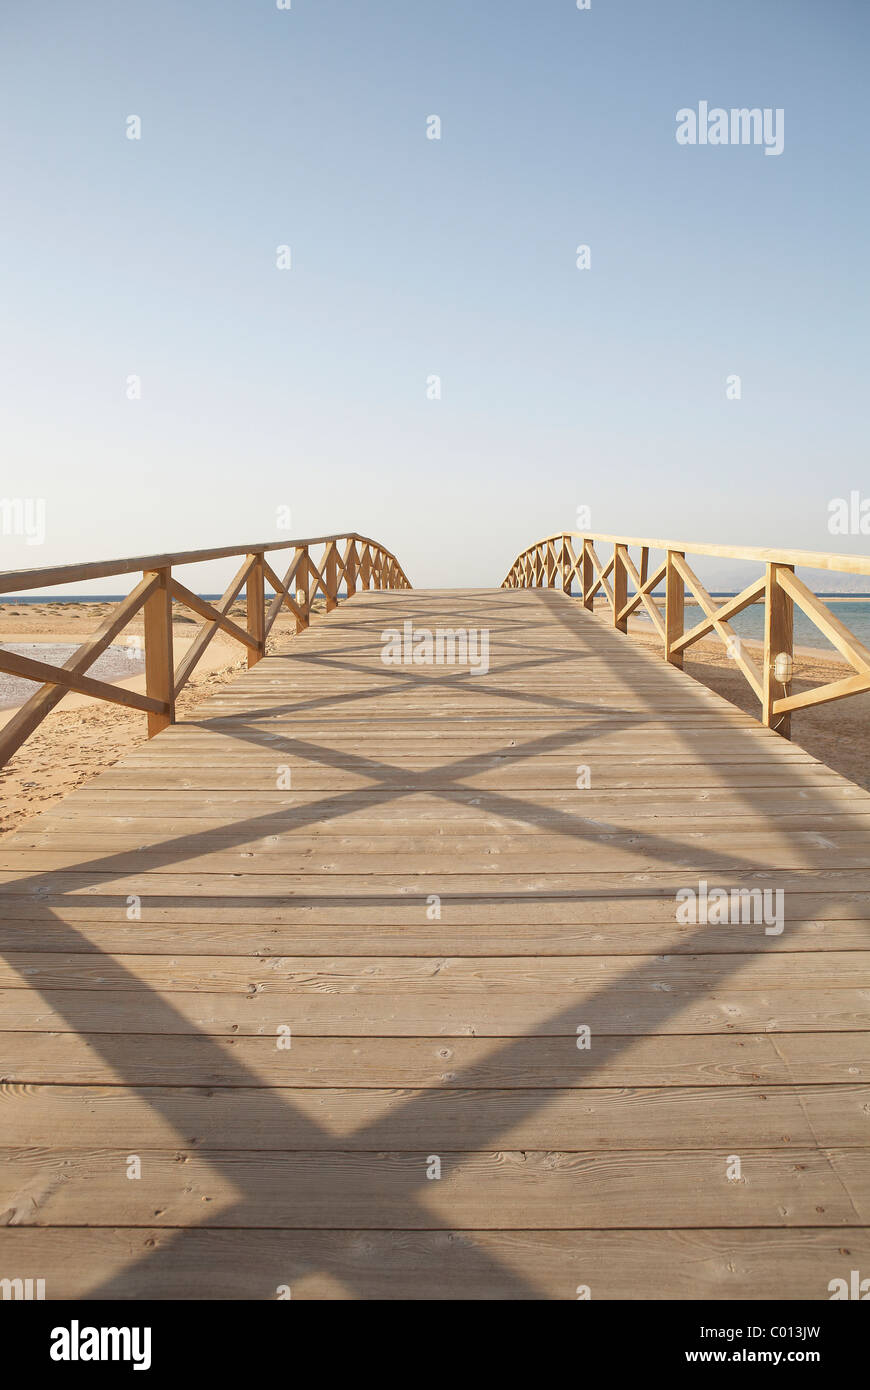 Wooden bridge with railings in the morning light, Soma Bay, Red Sea, Egypt, Africa Stock Photo